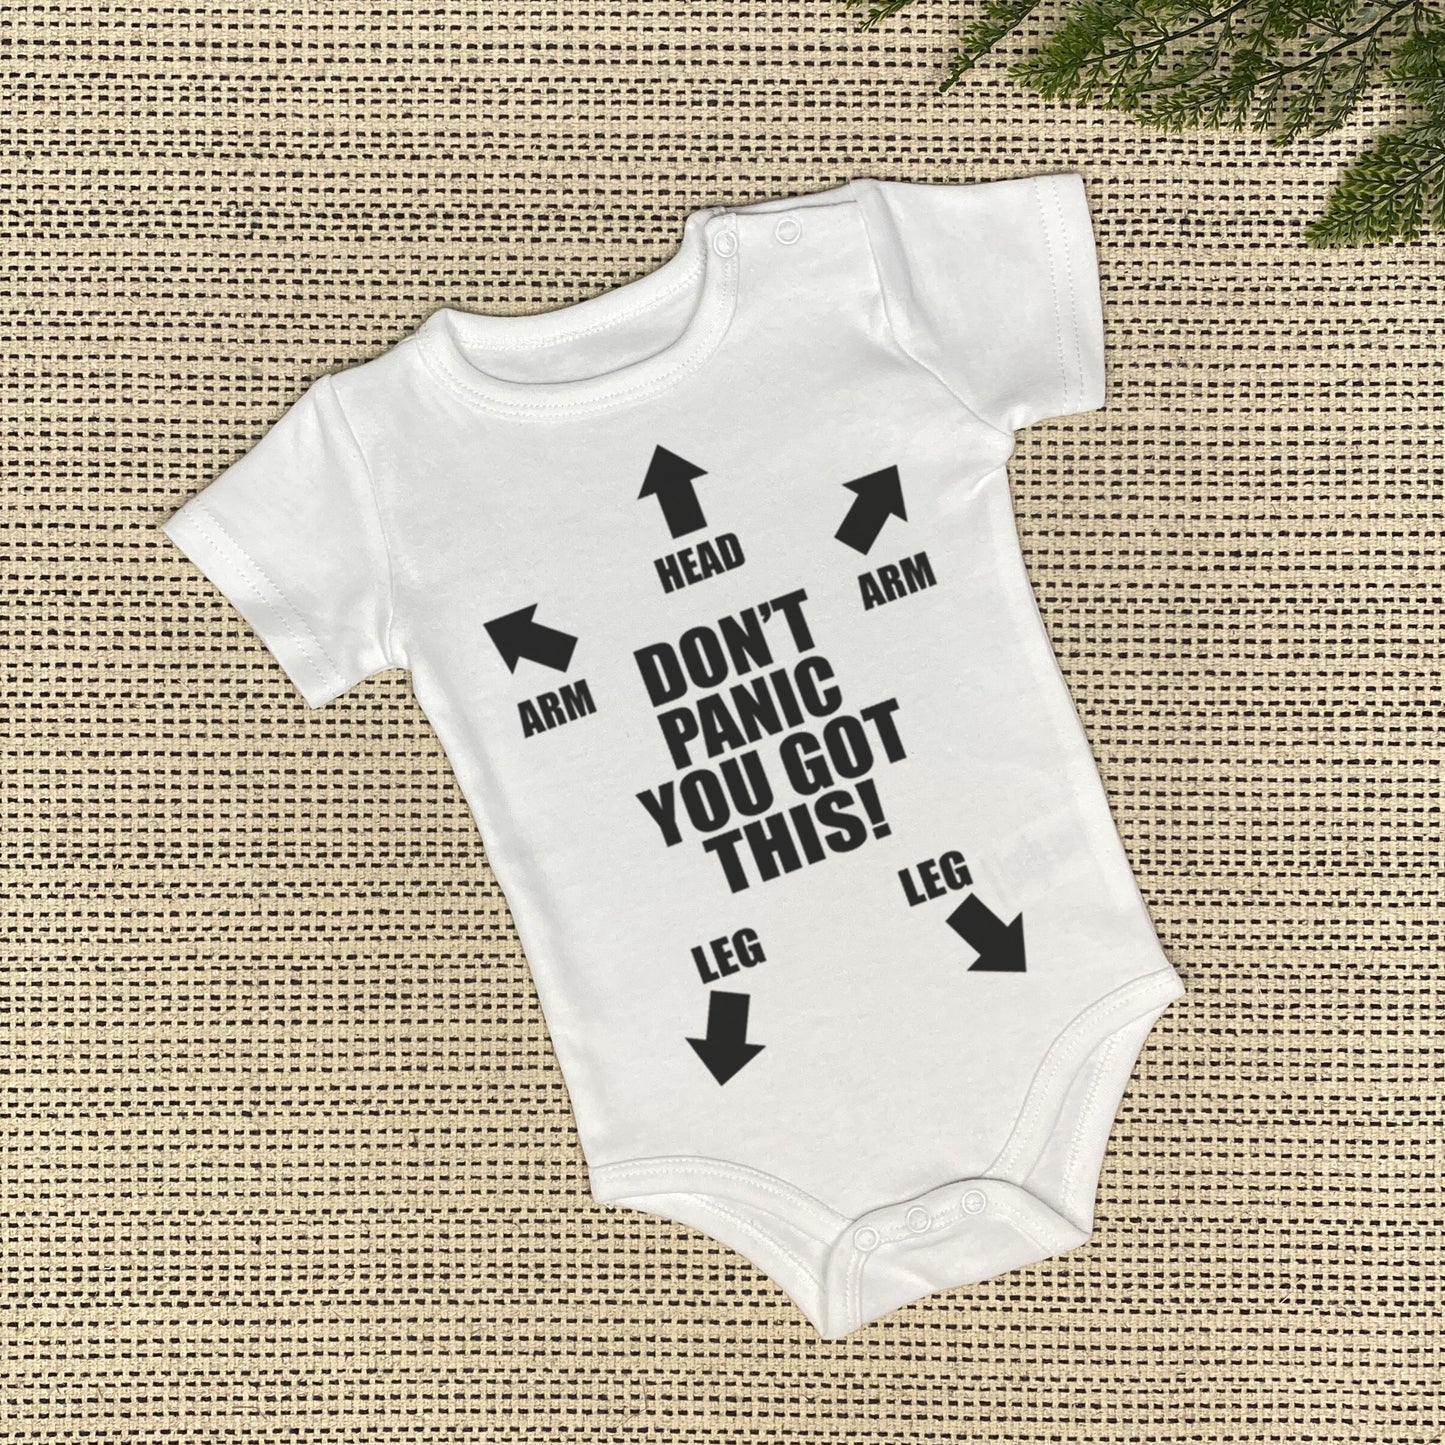 Don't Panic, You Got This Onesie